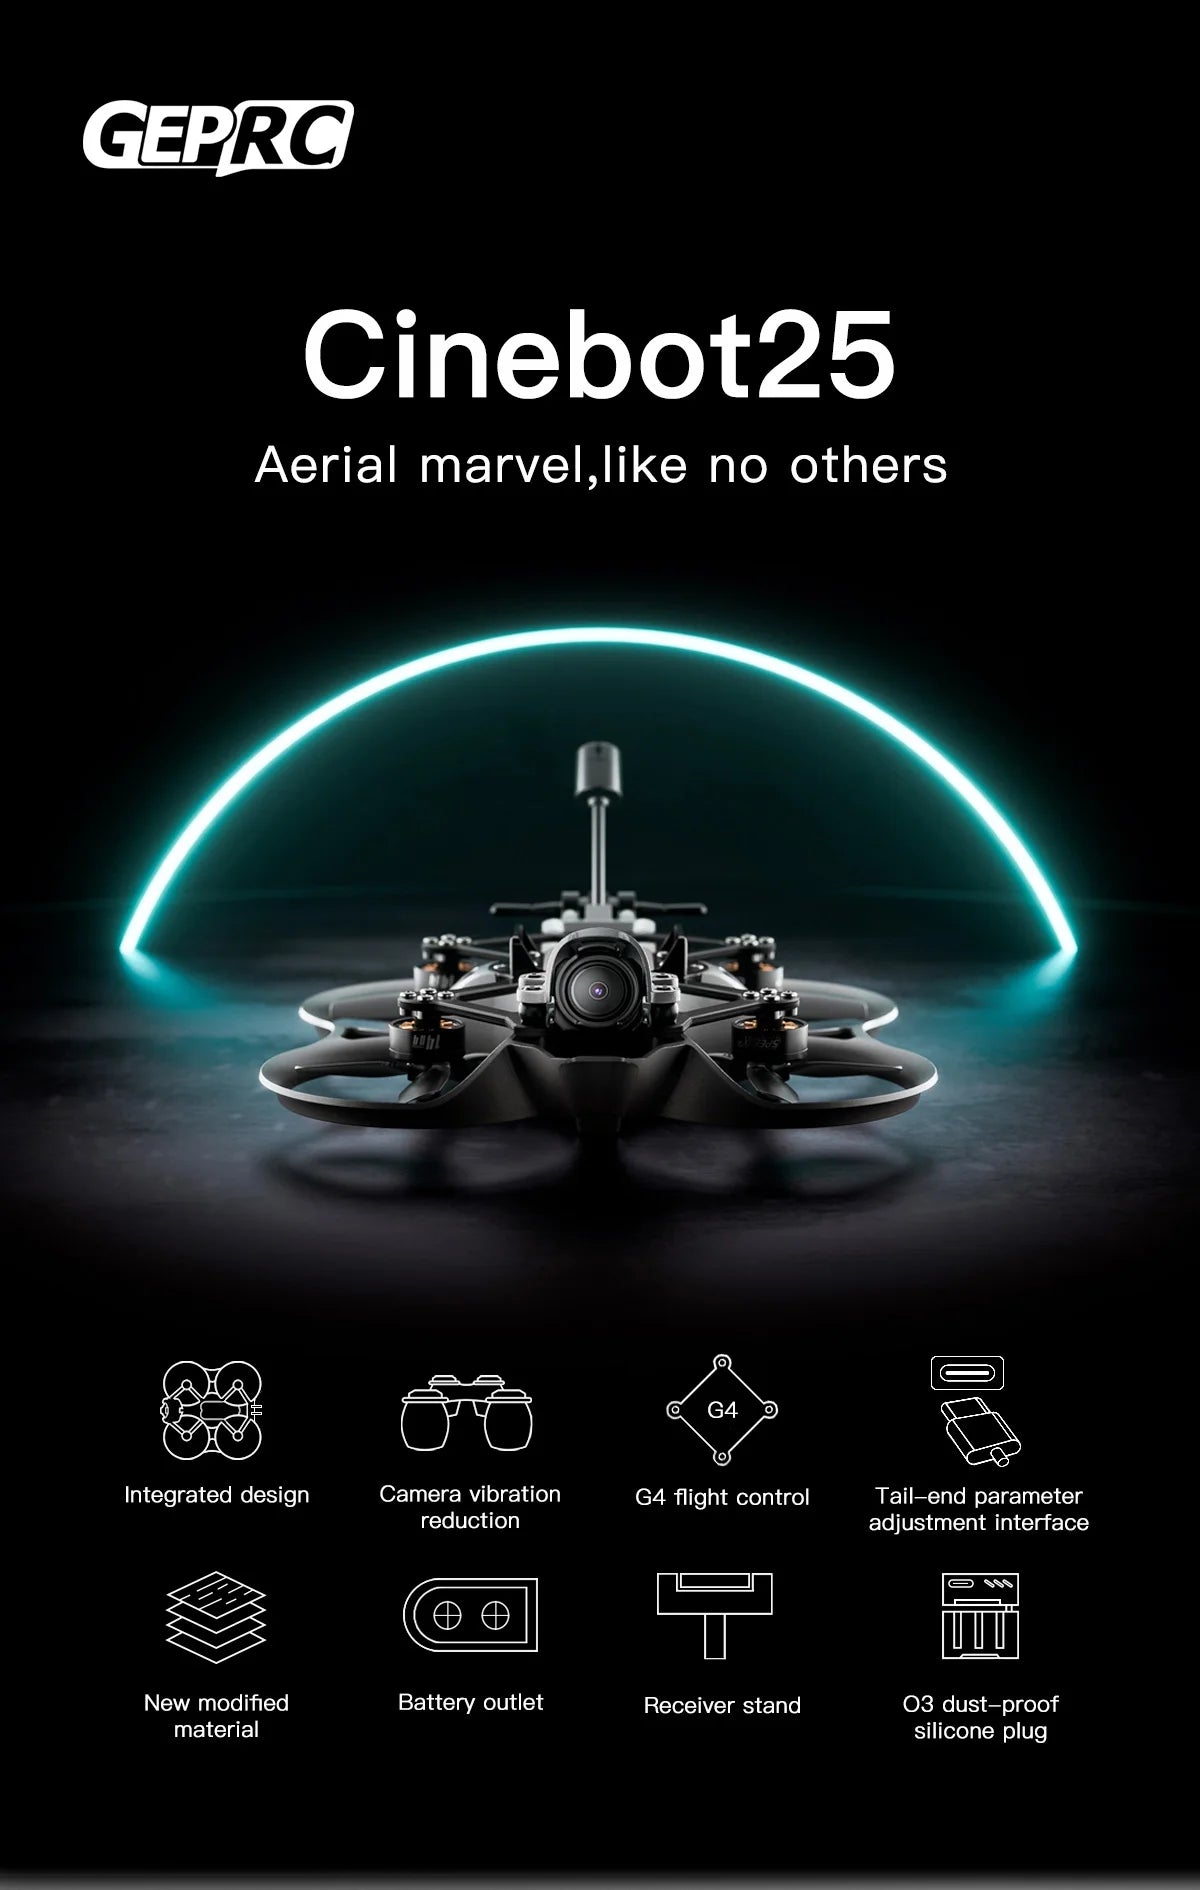 GEPRC Cinebot25 S WTFPV 2.5inch FPV Drone, GEPRC Cinebot25 Aerial marvel,like no thers buhl